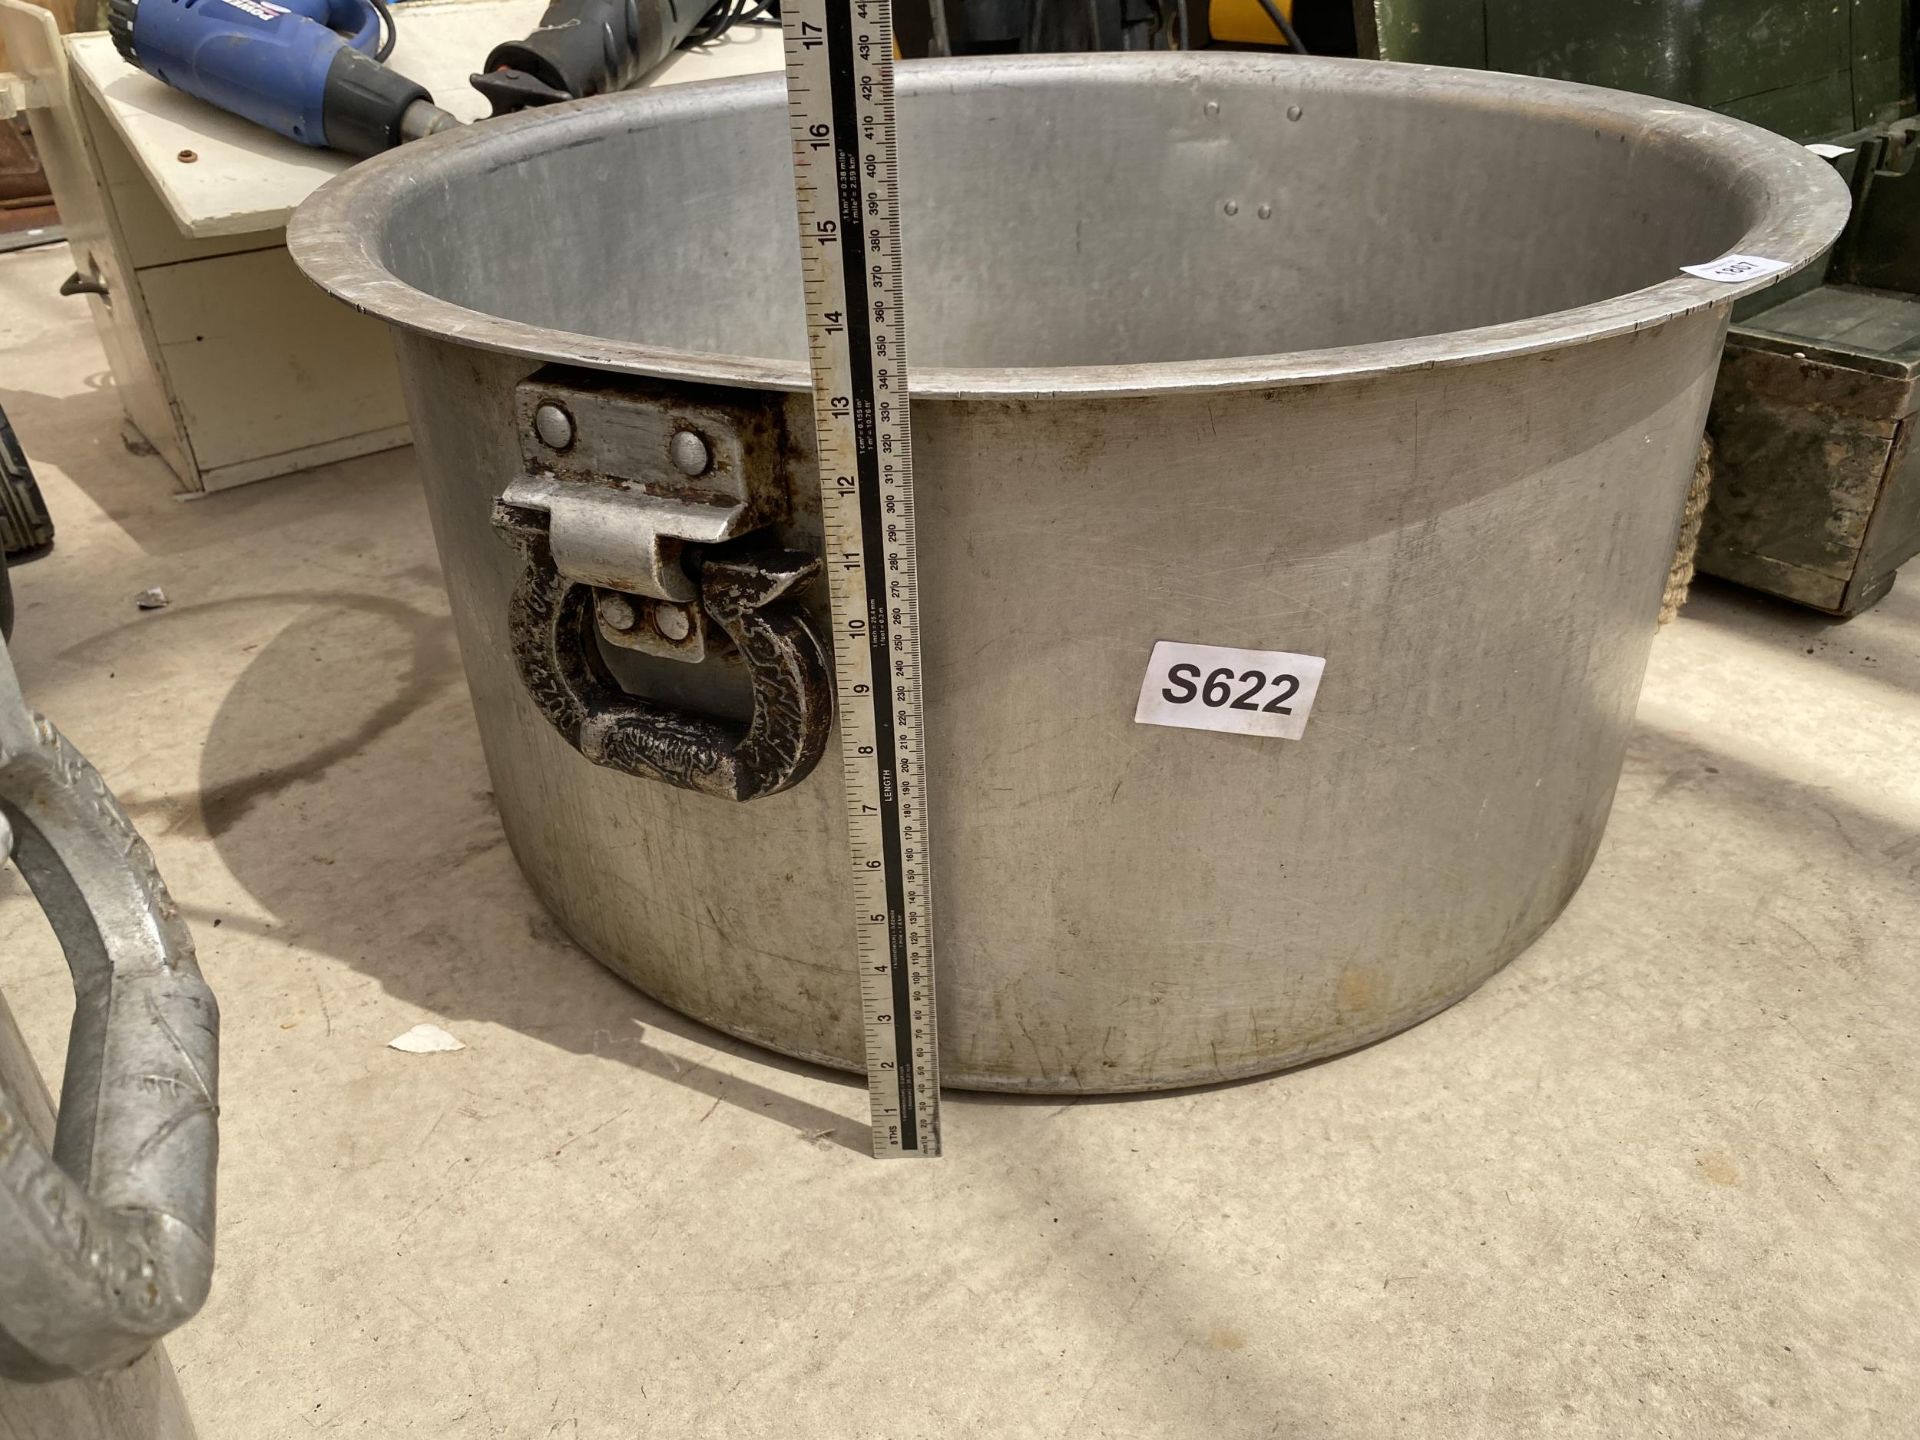 A VERY LARGE STAINLESS STEEL COOKING POT - Image 3 of 3